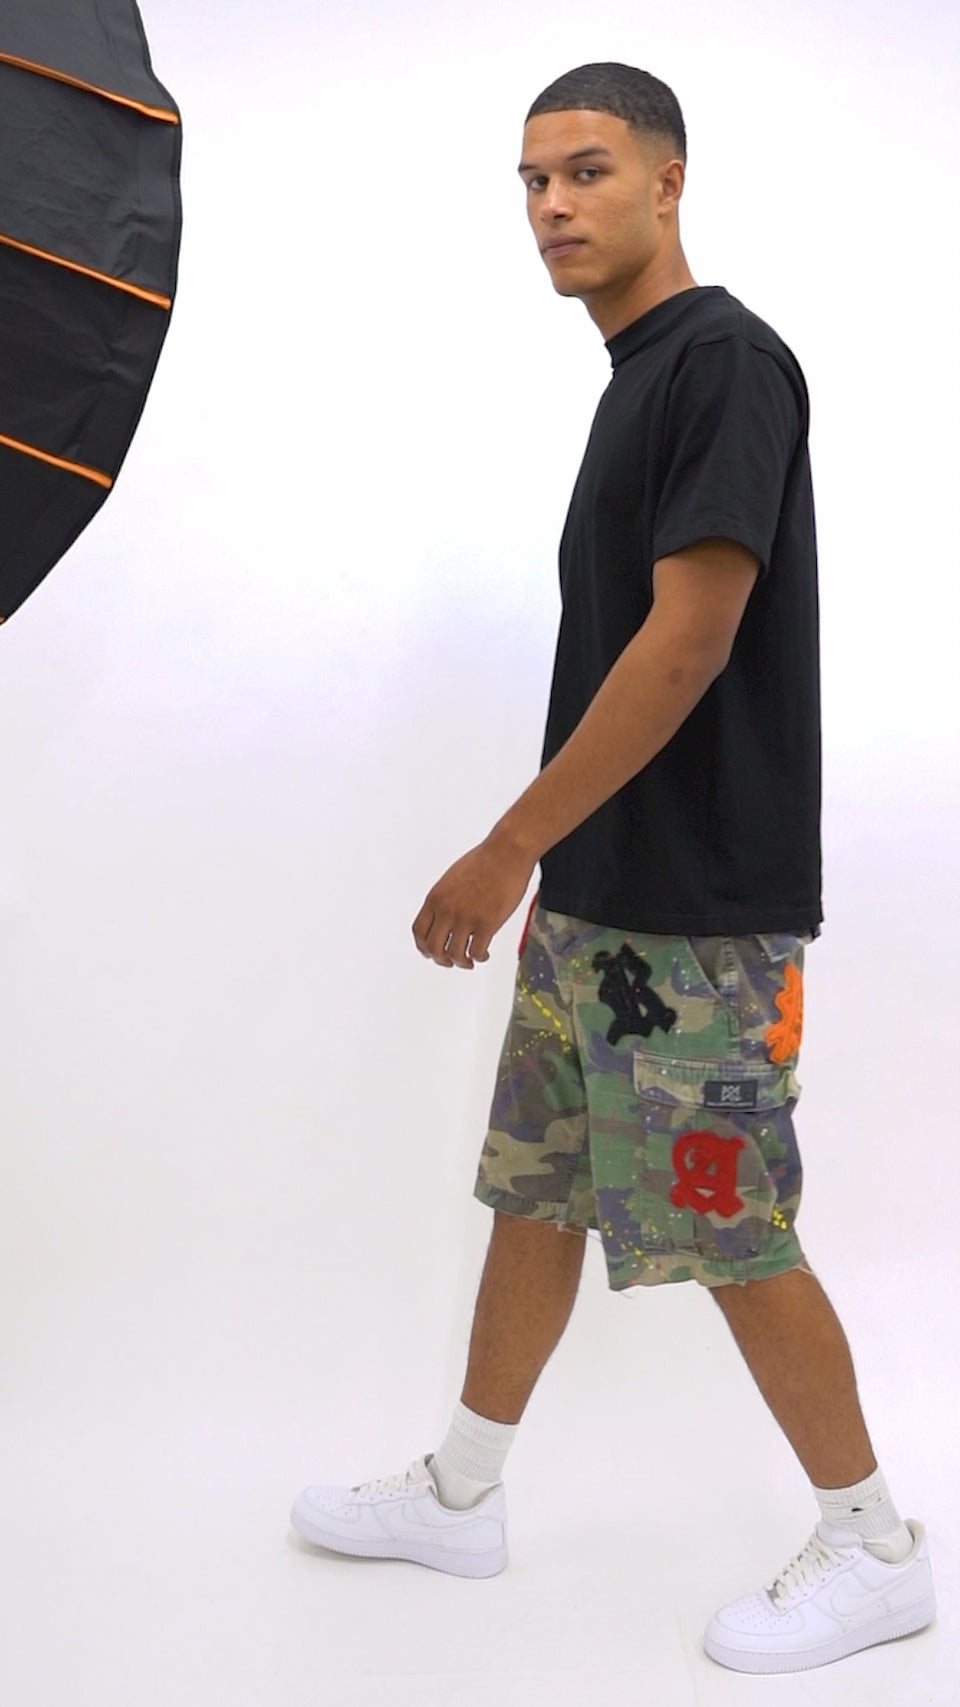 Real Artistic People - Camo Cargo Shorts Green